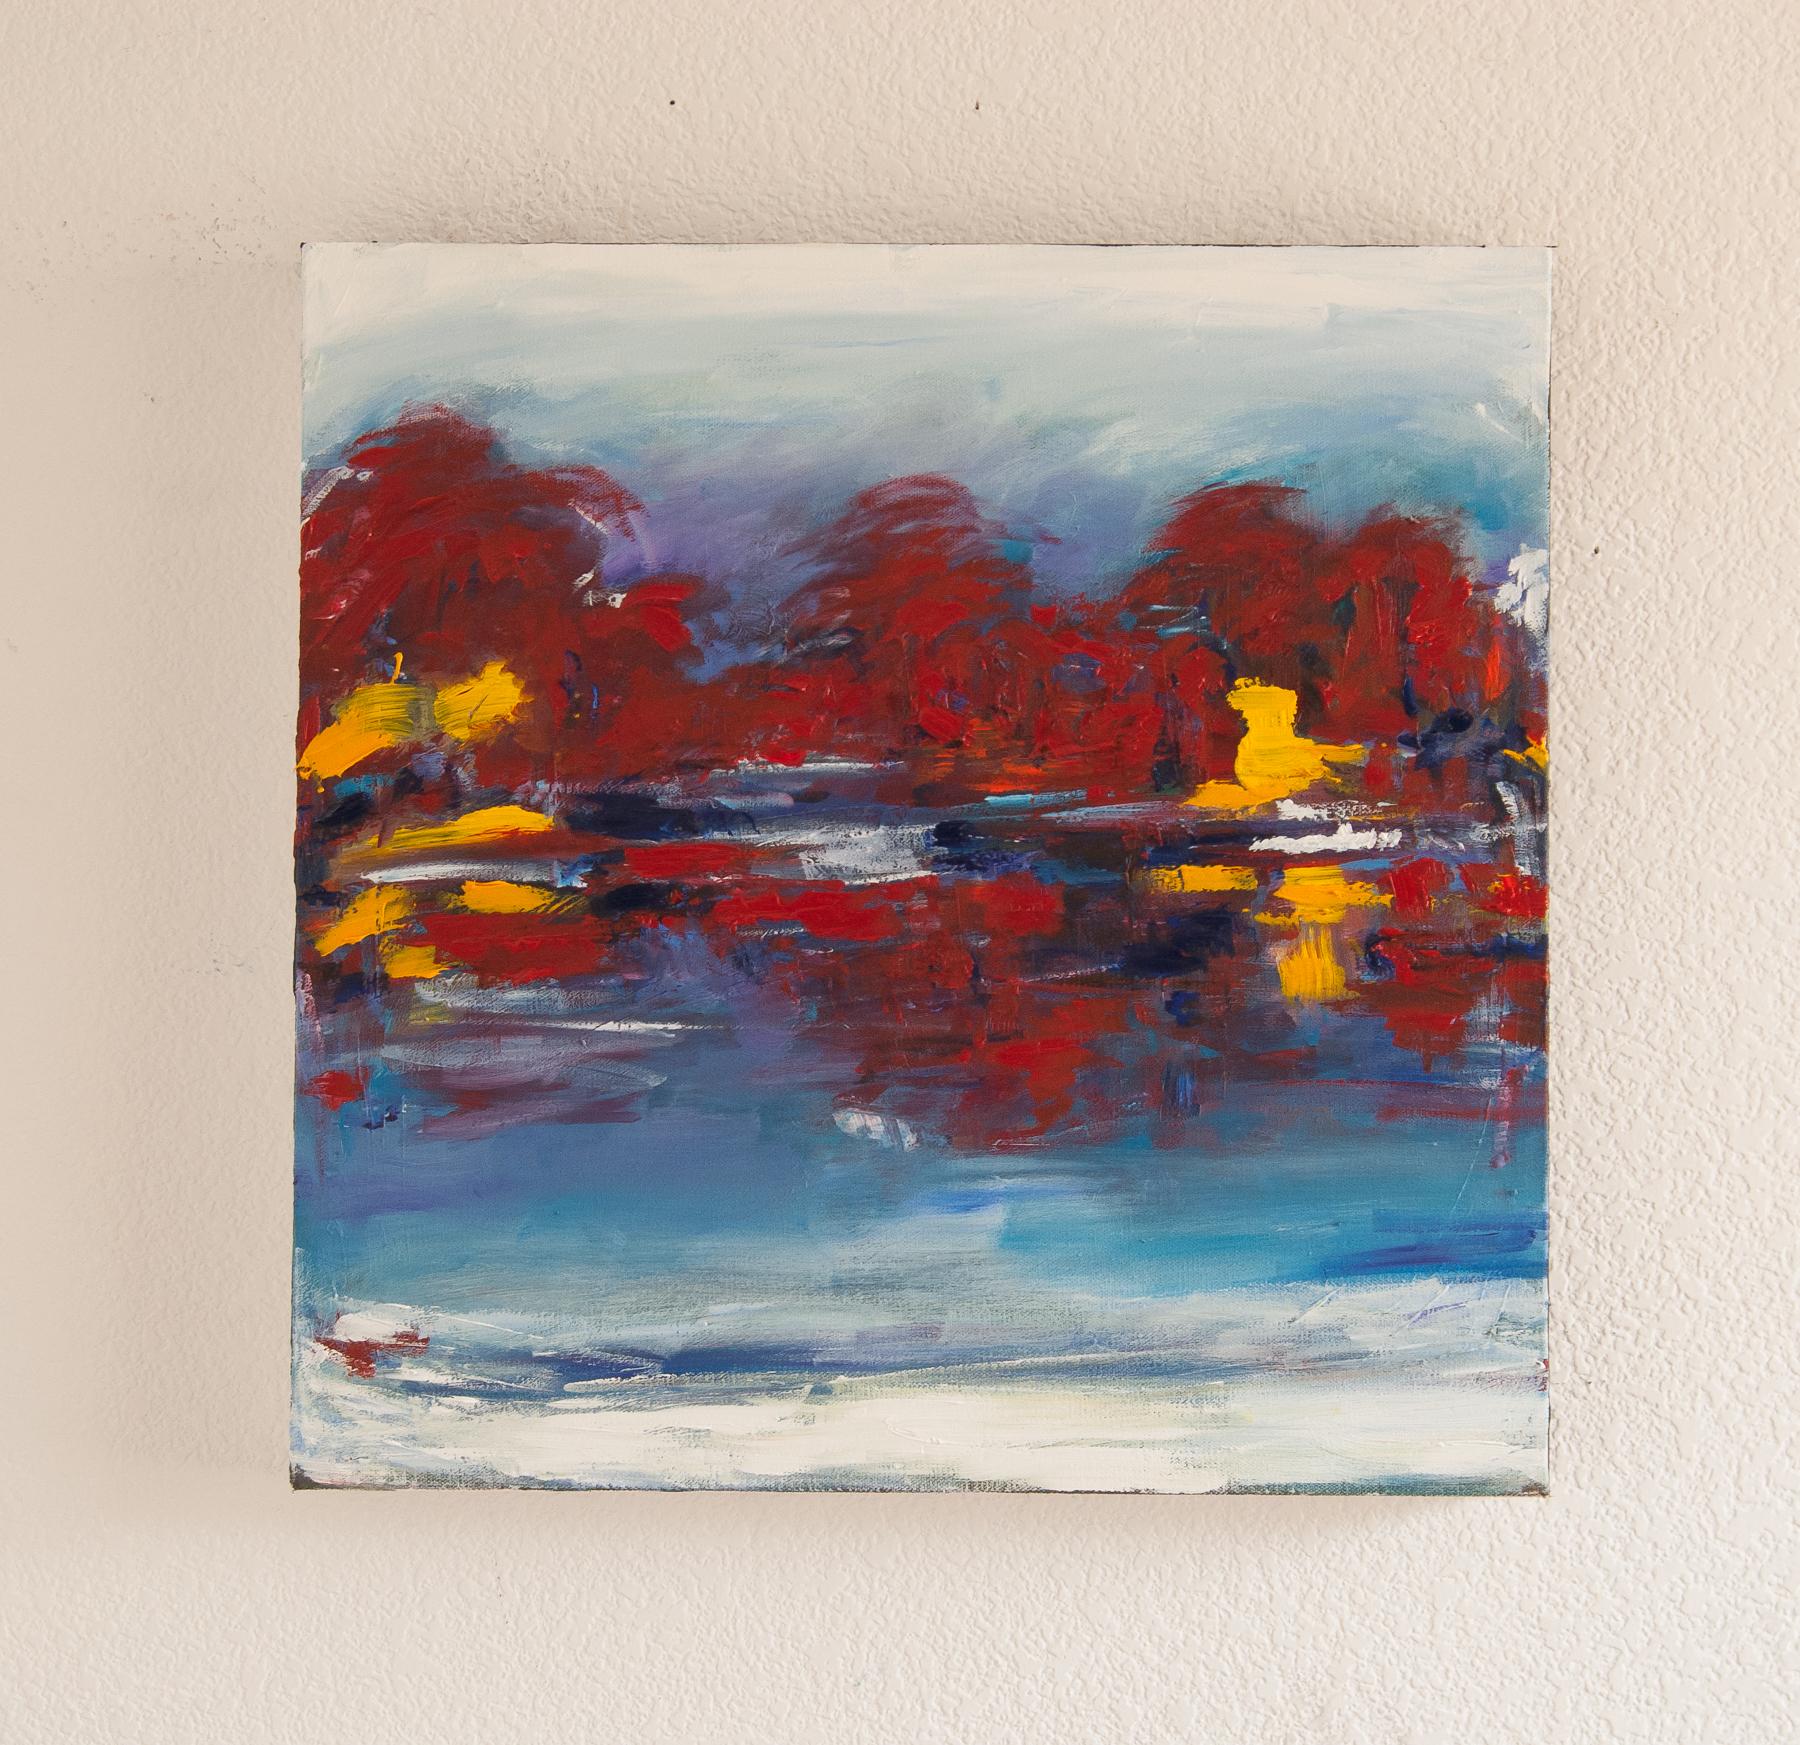 <p>Artist Comments<br>Seasonal abstractions unfold in artist Kajal Zaveri's imaginative abstract piece. A quiet and clear lake flows along the abundant autumnal foliage on a chilly day. Kajal models her painting after the exhilarating sights of an